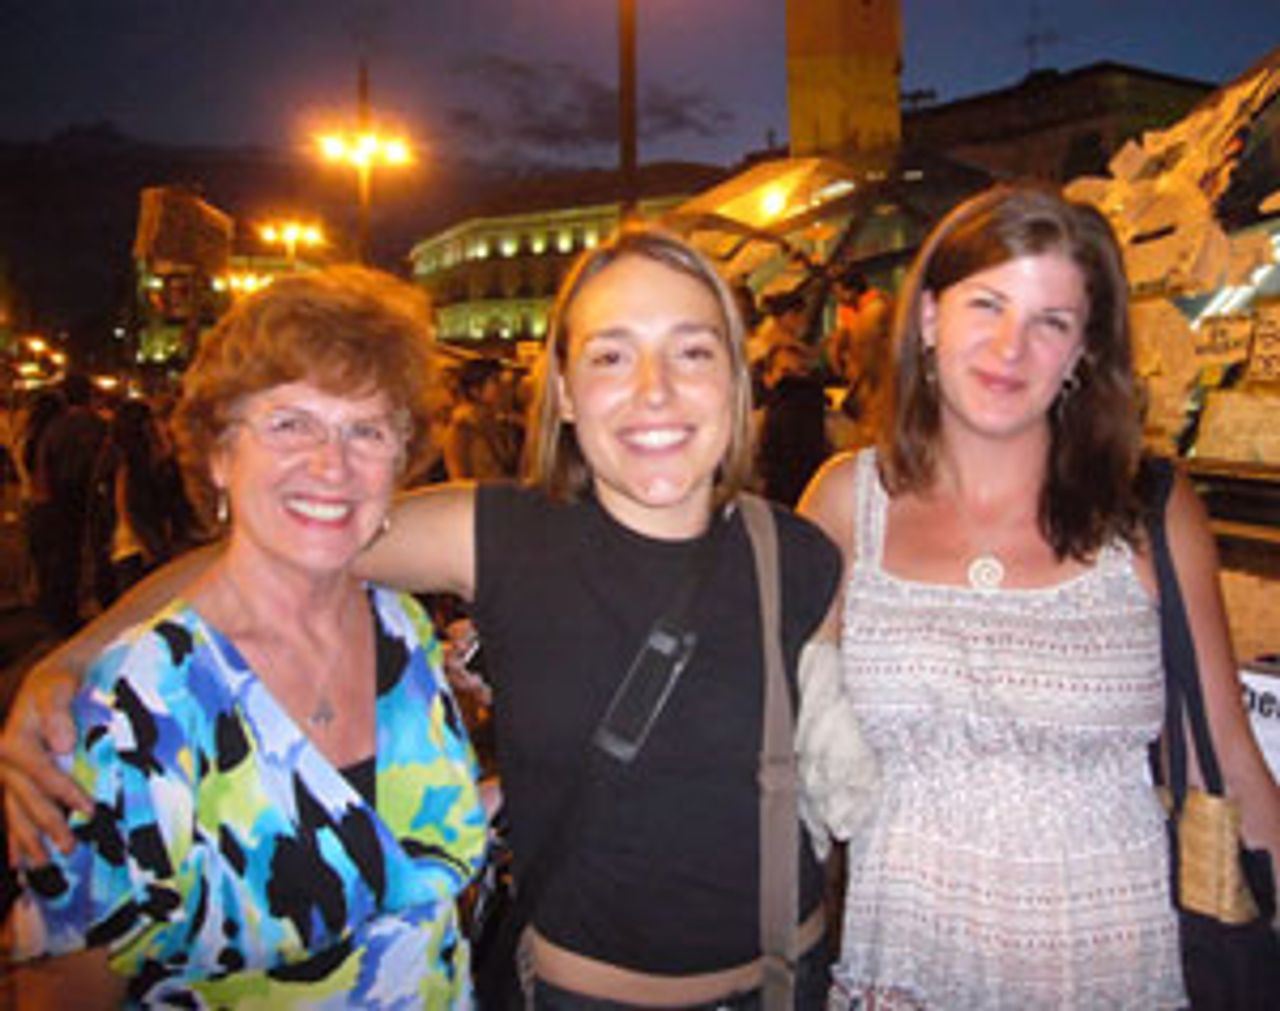 Tania (centre) with friends at the Puerta del Sol 